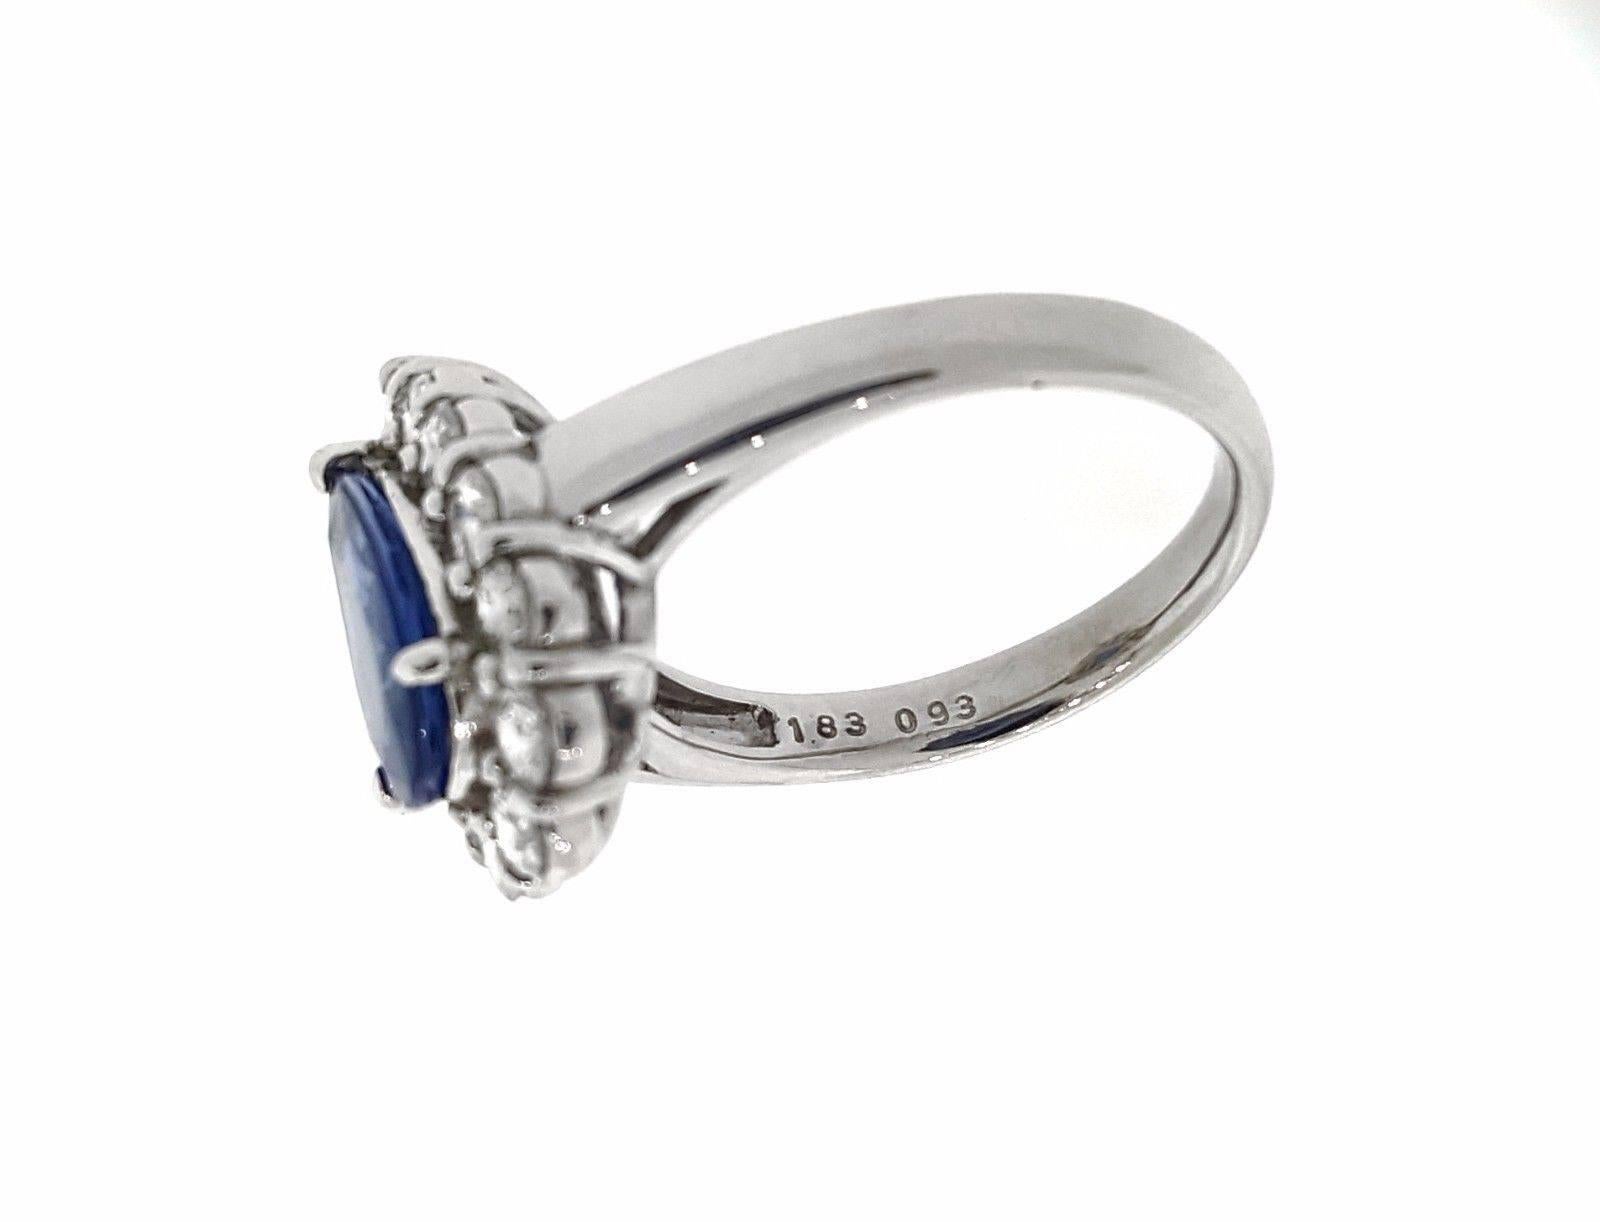 Pear-shaped cornflower blue sapphire with diamond halo set in platinum. Sapphire weighs 1.83 carats. The diamonds weigh .93 carats in total. The clarity is VS2, and the color is H. The setting is platinum. It is marked with Pt900, 1.83, 093. The